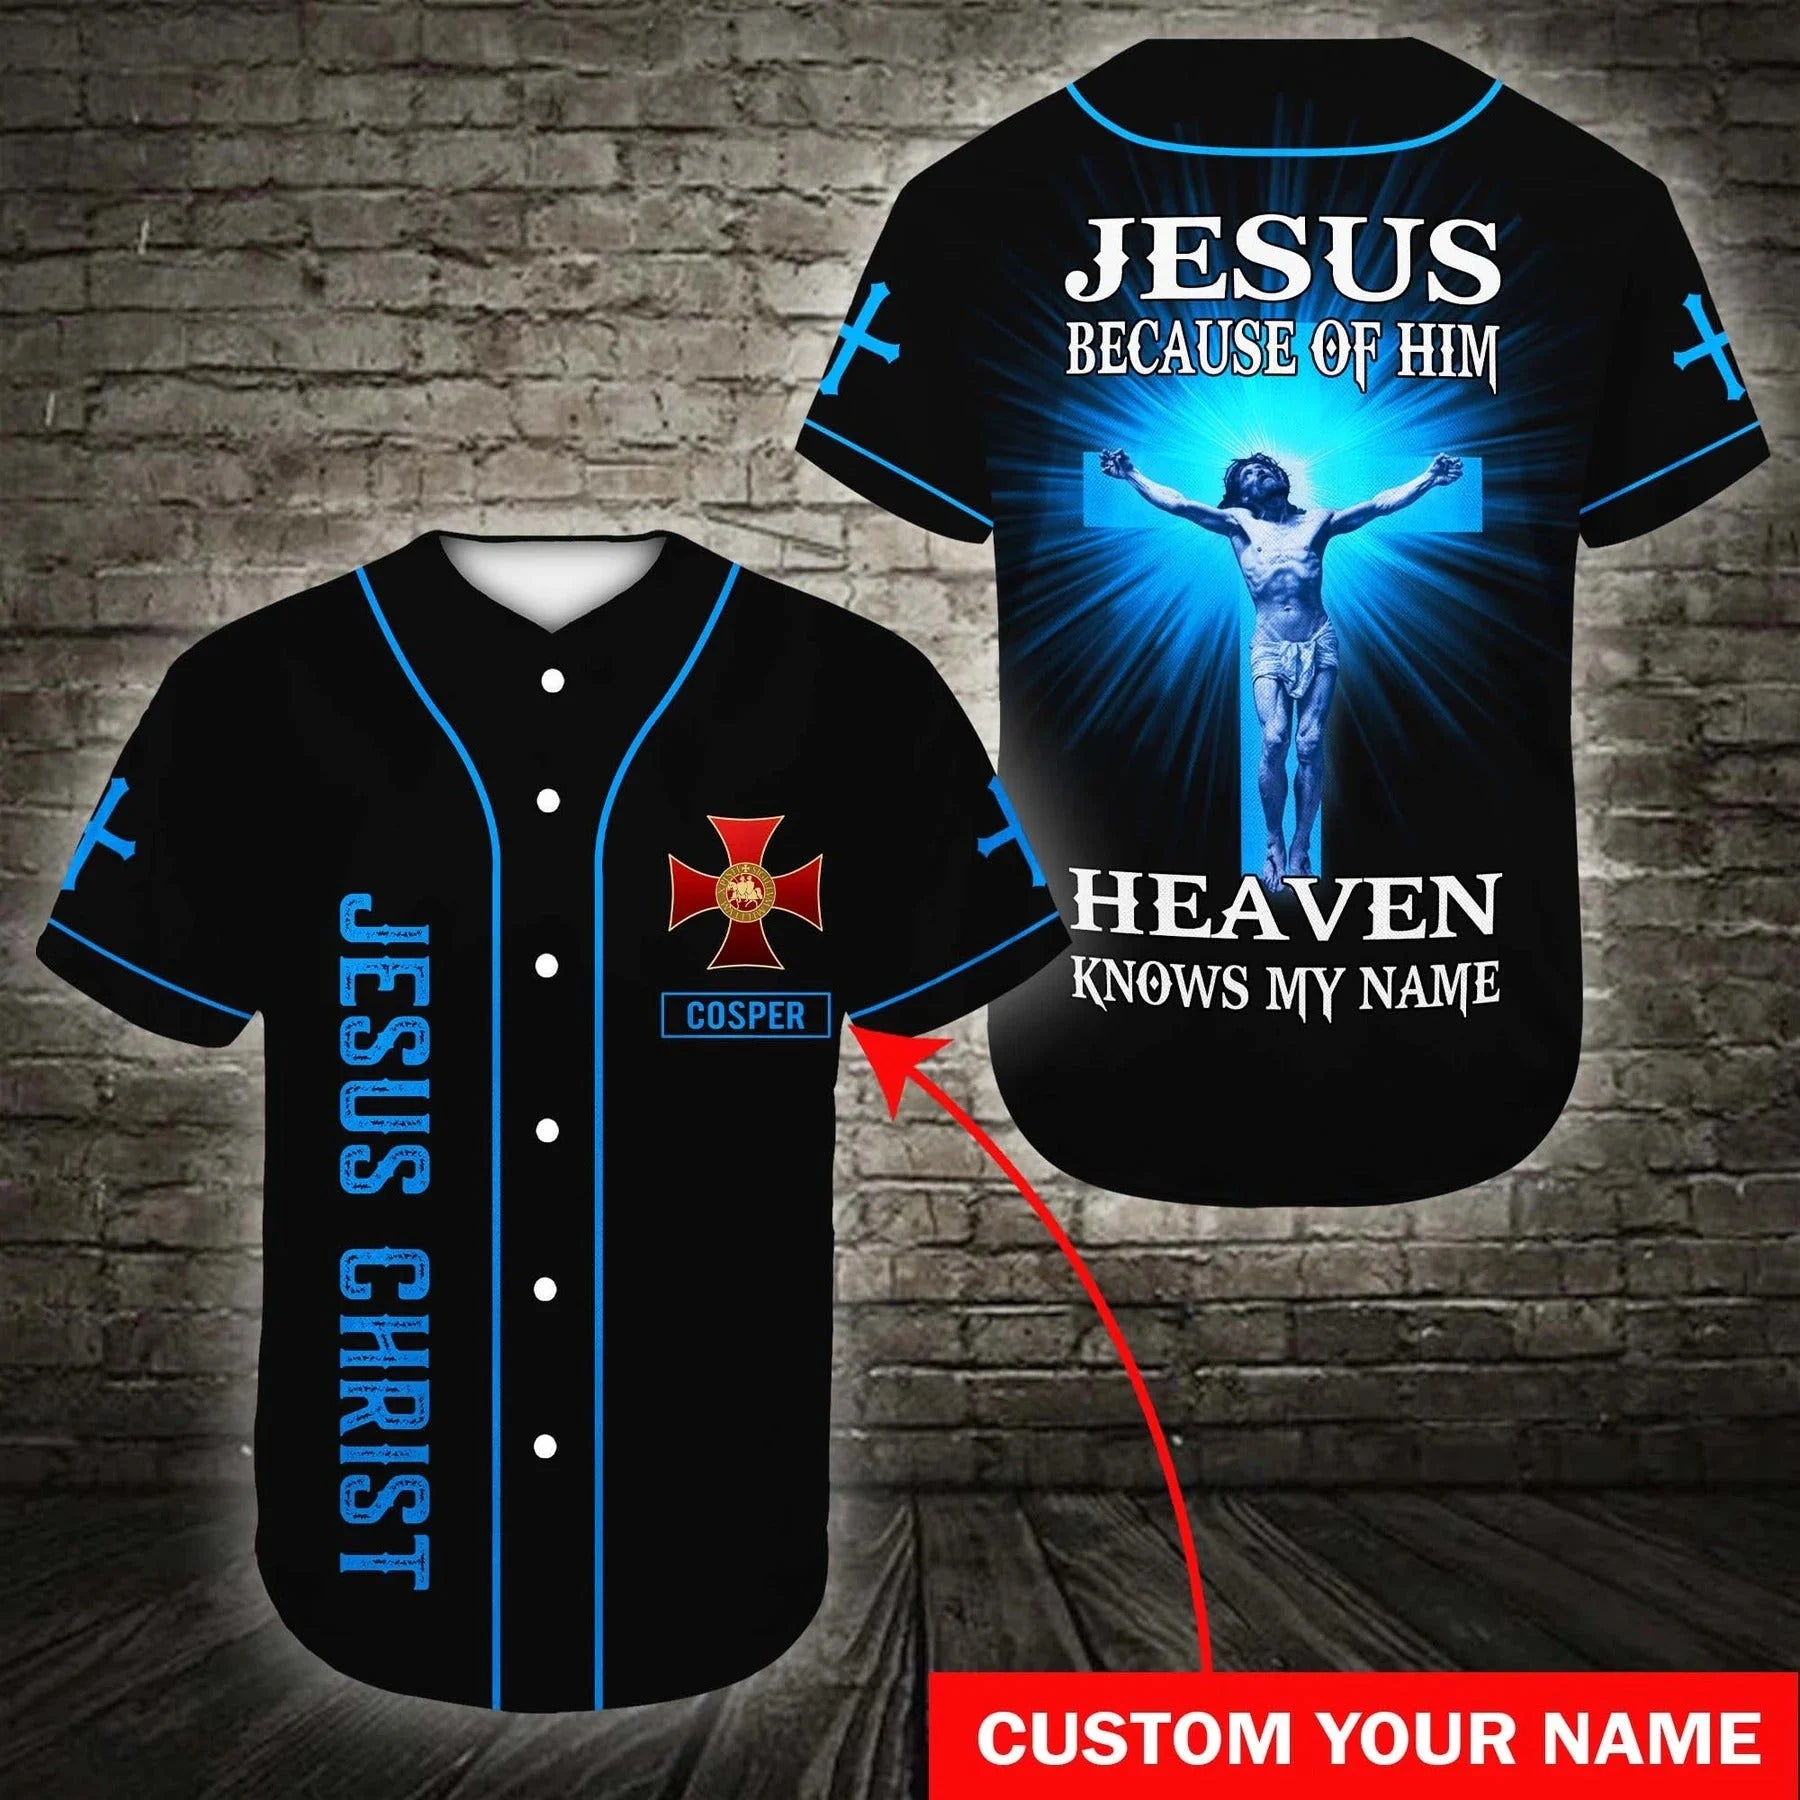 Personalized Jesus Baseball Jersey - Cross Baseball Jersey - Gift For Christians - Because Of Him Heaven Knows My Name Custom Baseball Jersey